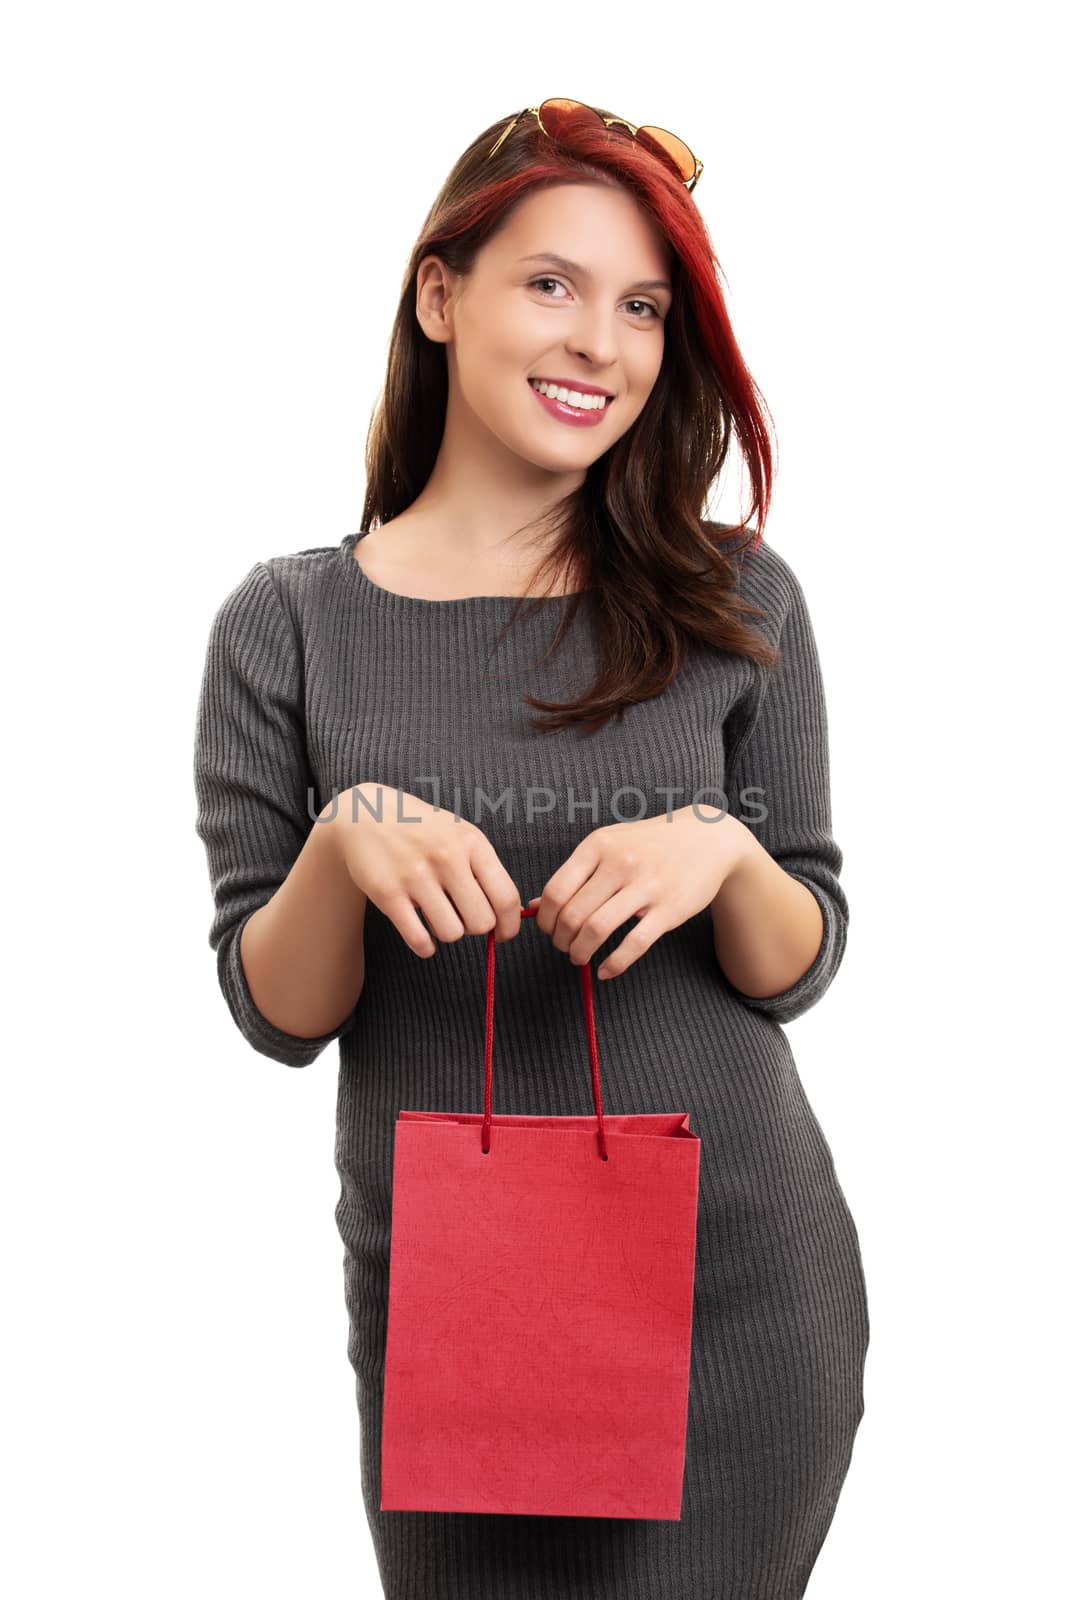 A portrait of a beautiful smiling young girl in a dress, holding a shopping bag, isolated on white background.